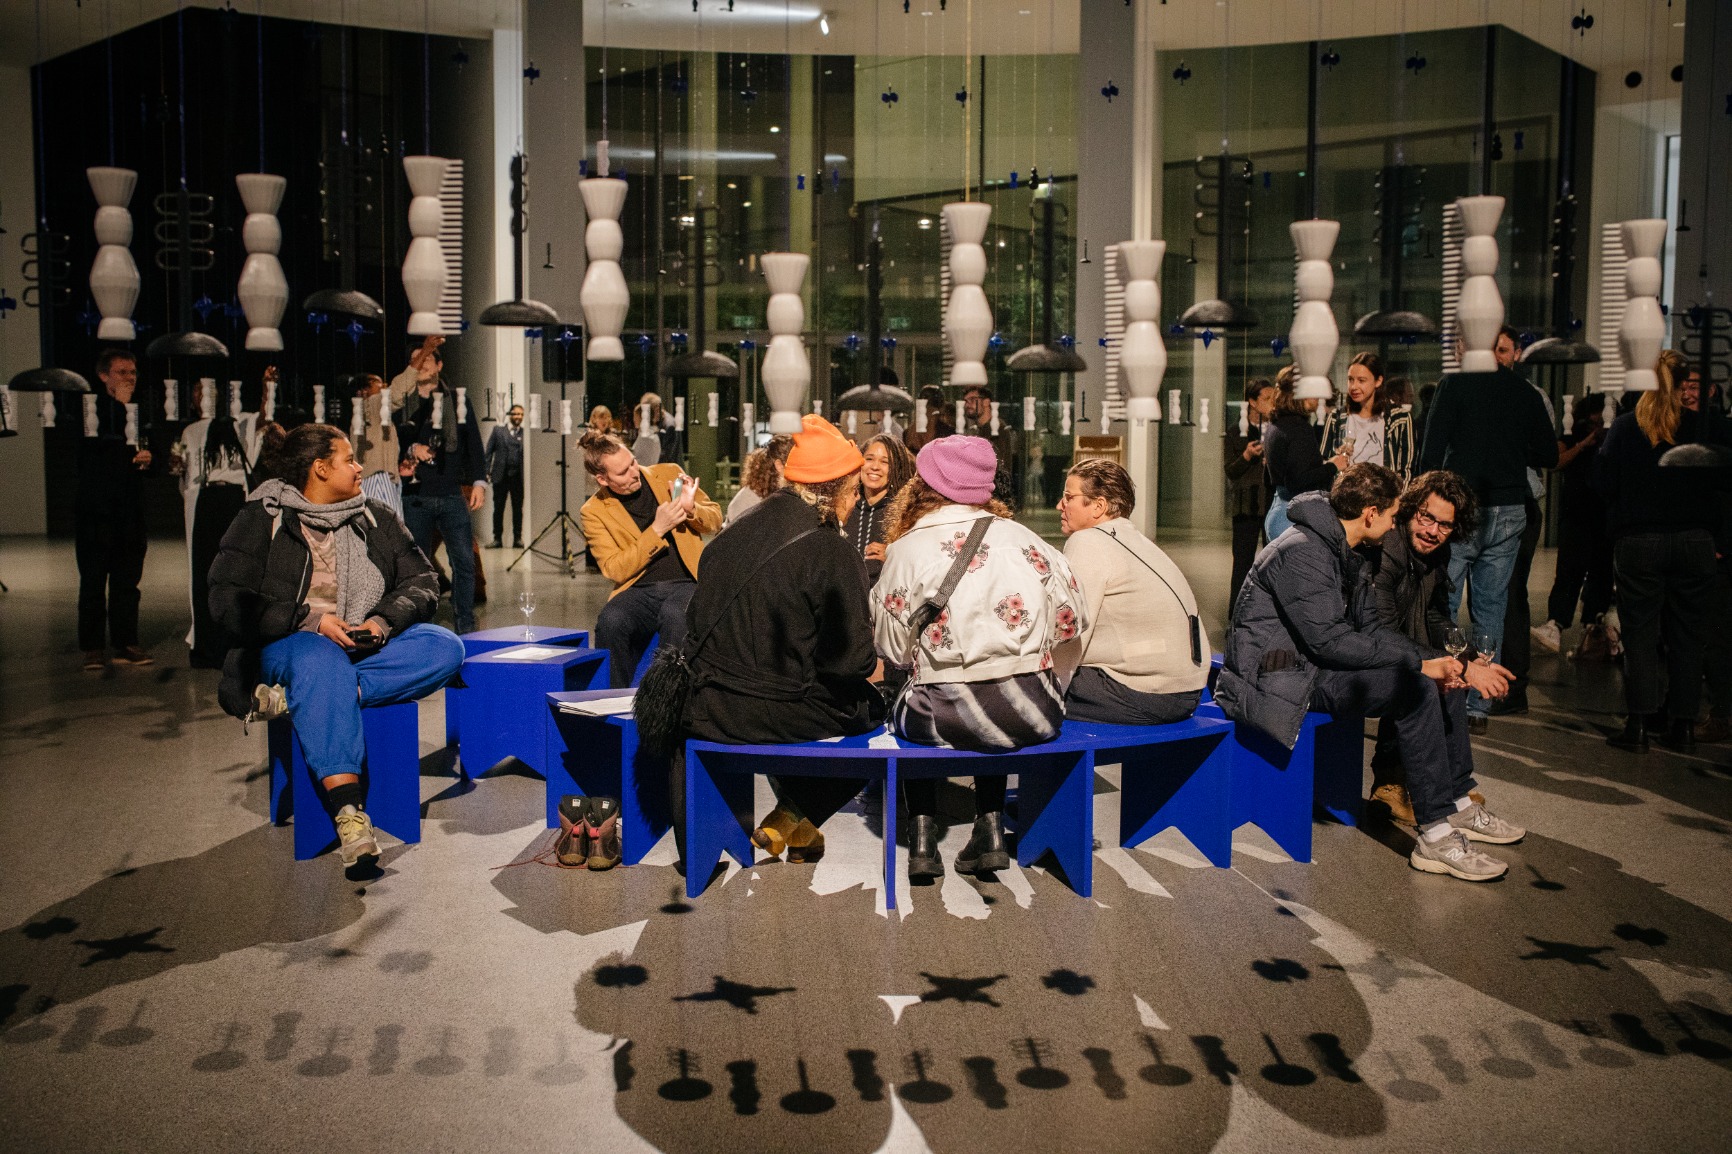 Photo of artwork. Artwork is a transparent beaded hanging curtain of 16m in a circular form creating an interior. The interior has blue benches that when put together form a circle. The curtain beads are blue, white and black. The strings are blue and pink. There are people sitting on the bench listening with earphones to a soundscape. There are people standing outside and inside the curtain. The image is taken during the opening evening.